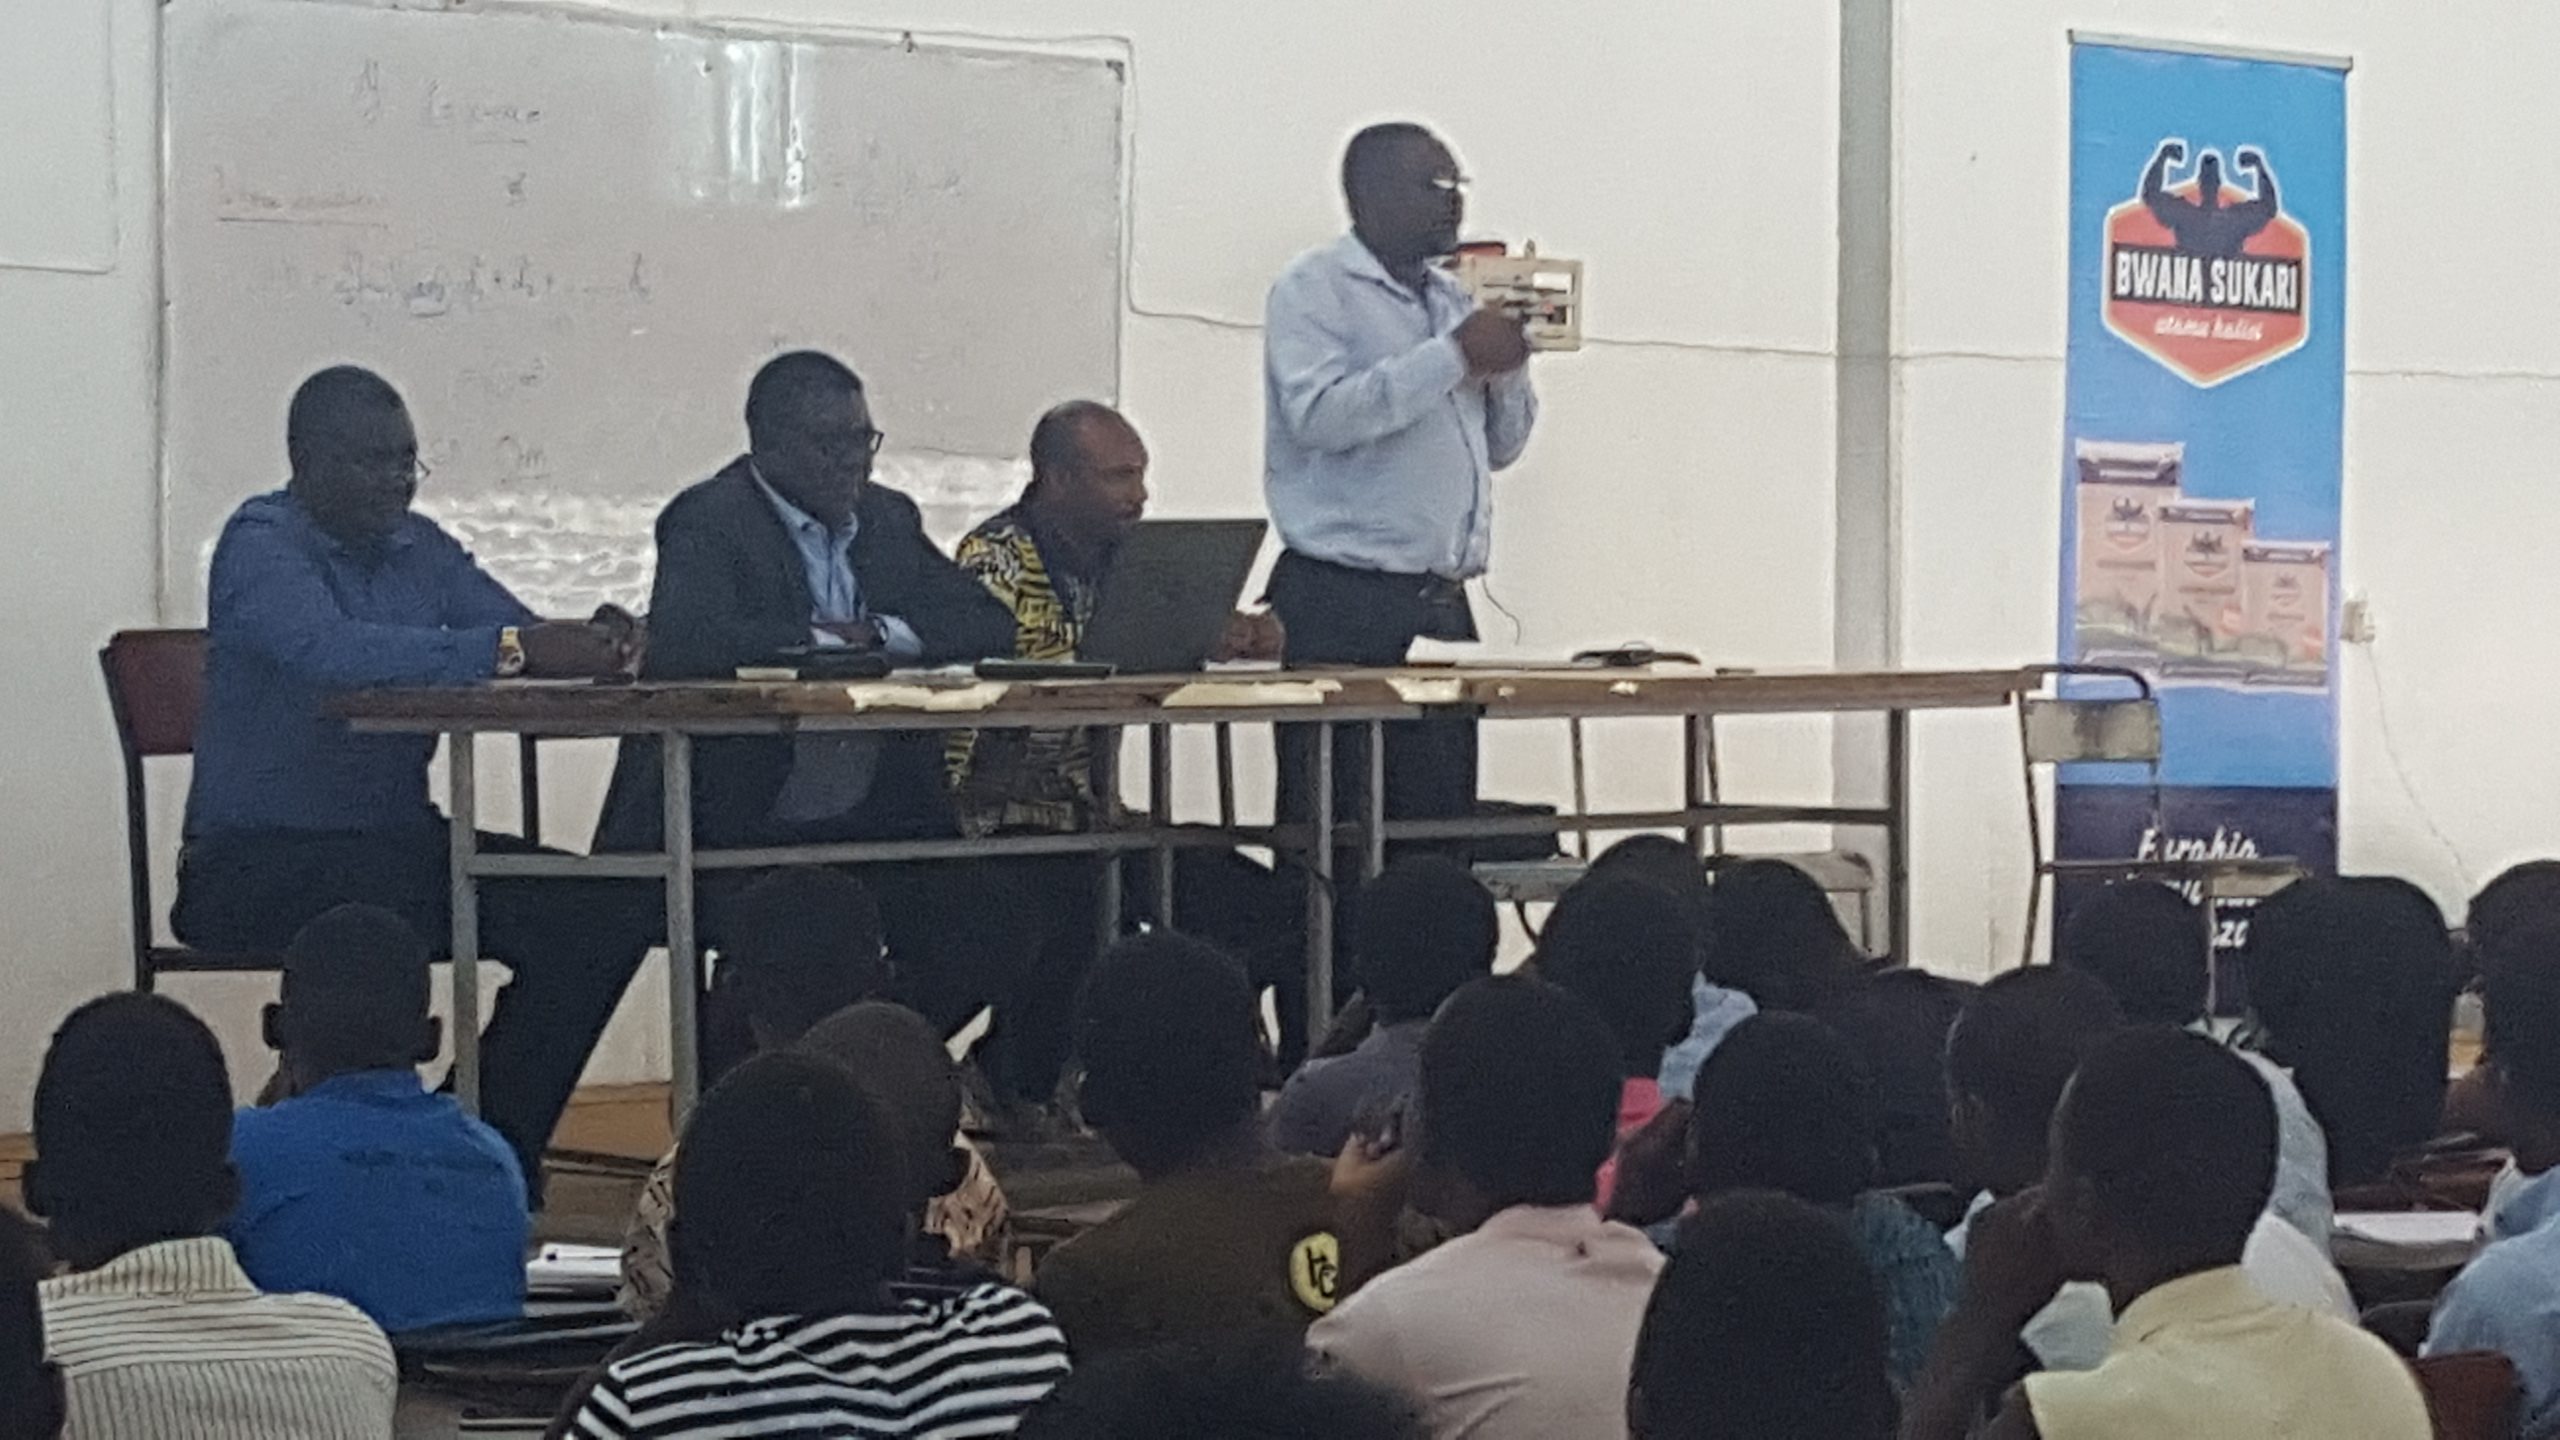 A represenative from Kilombero Sugar Company talking to students under College of Agriculture  on opportunities present in their company